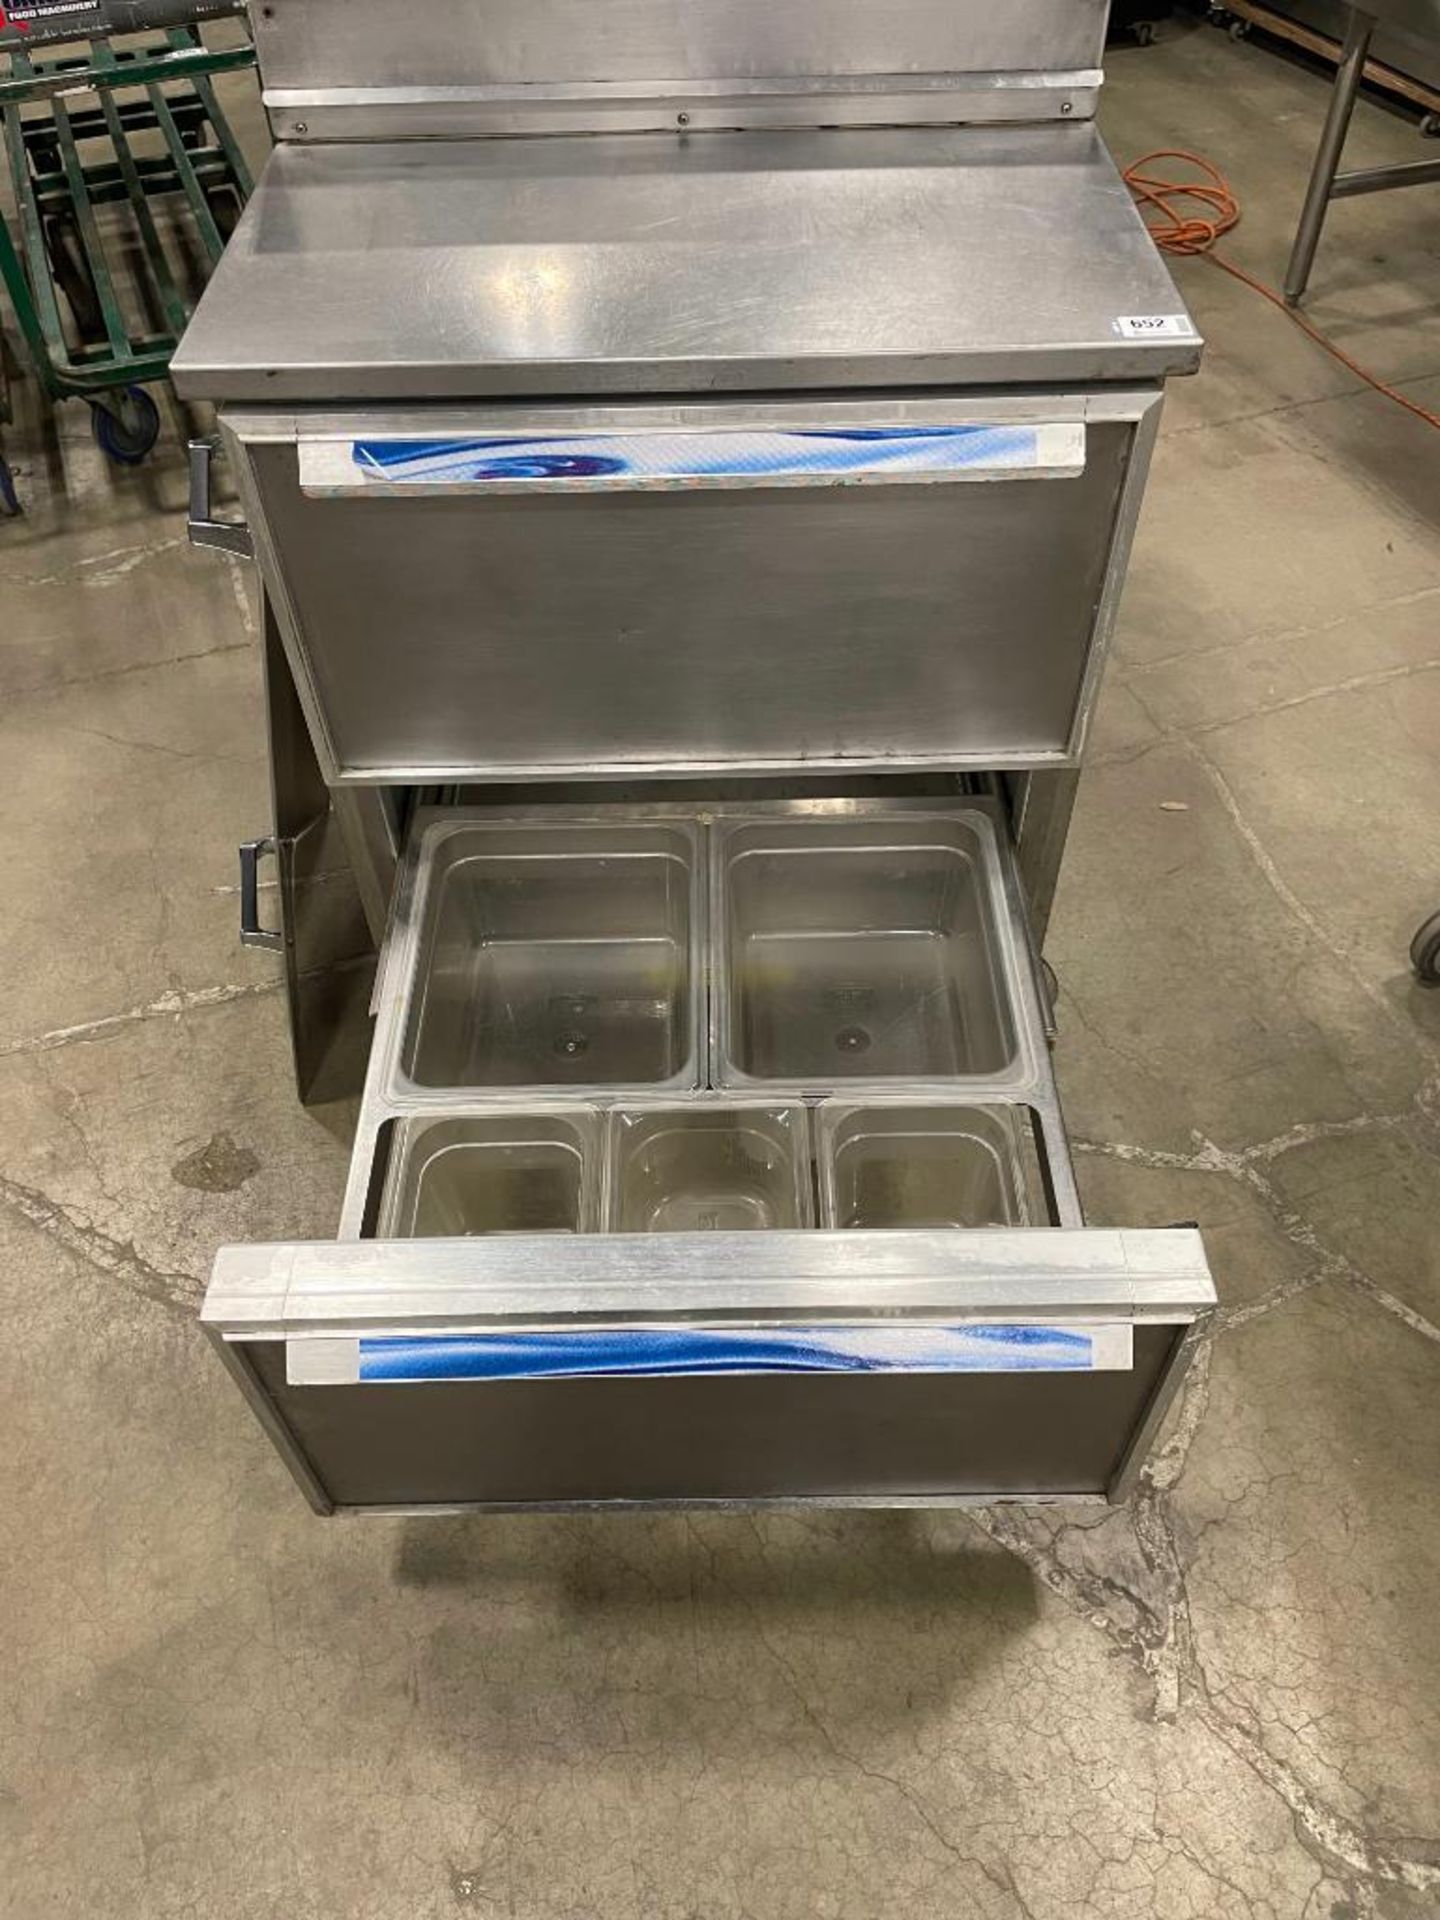 SILVERKING SKPZ27D 2-DRAWER REFRIGERATED PREP TABLE - Image 4 of 10